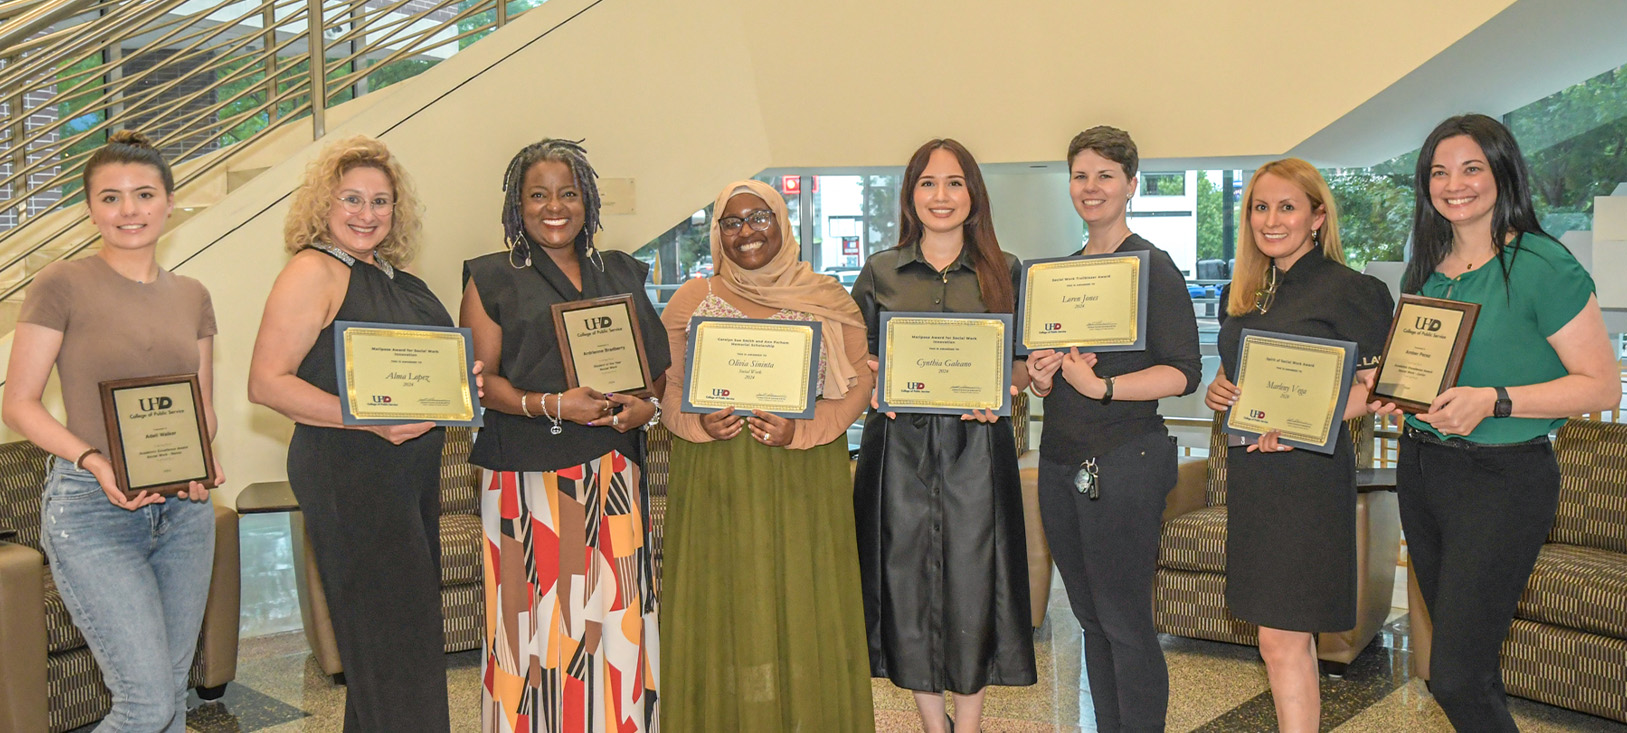  The College of Public Service Student Awards Ceremony